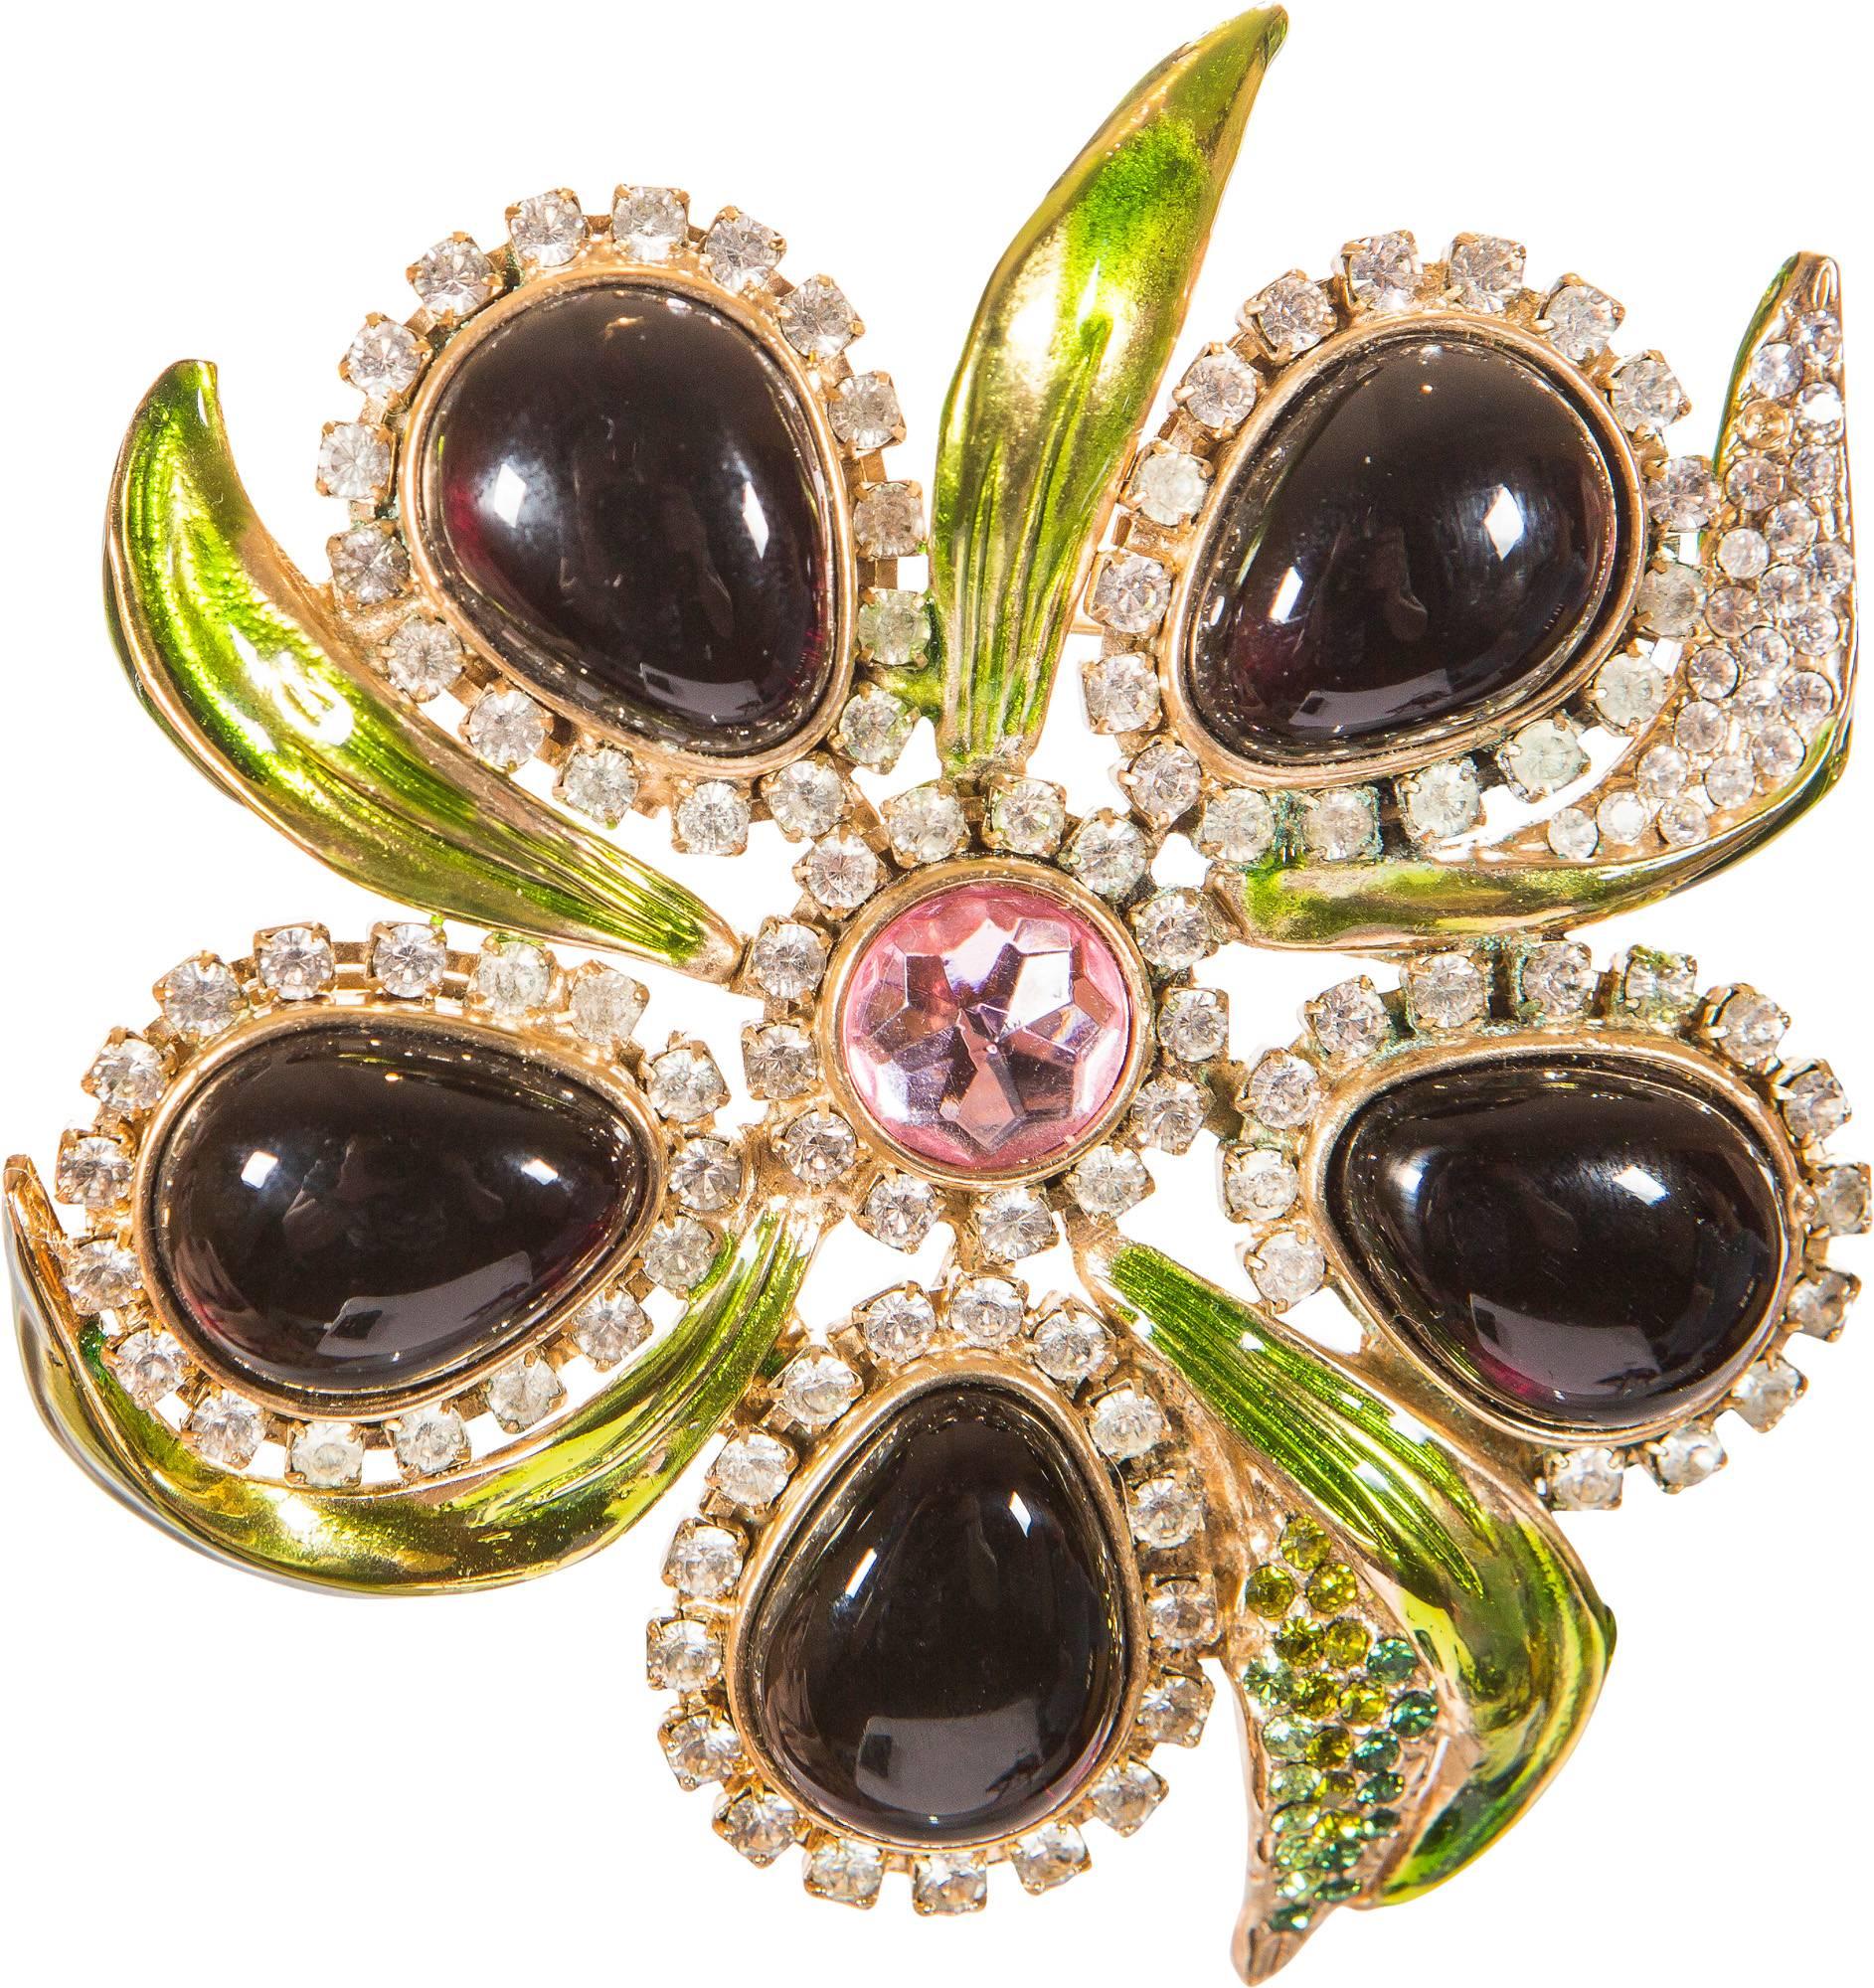 Tom Ford for Yves Saint Laurent Spring 2004 jeweled brooch For Sale